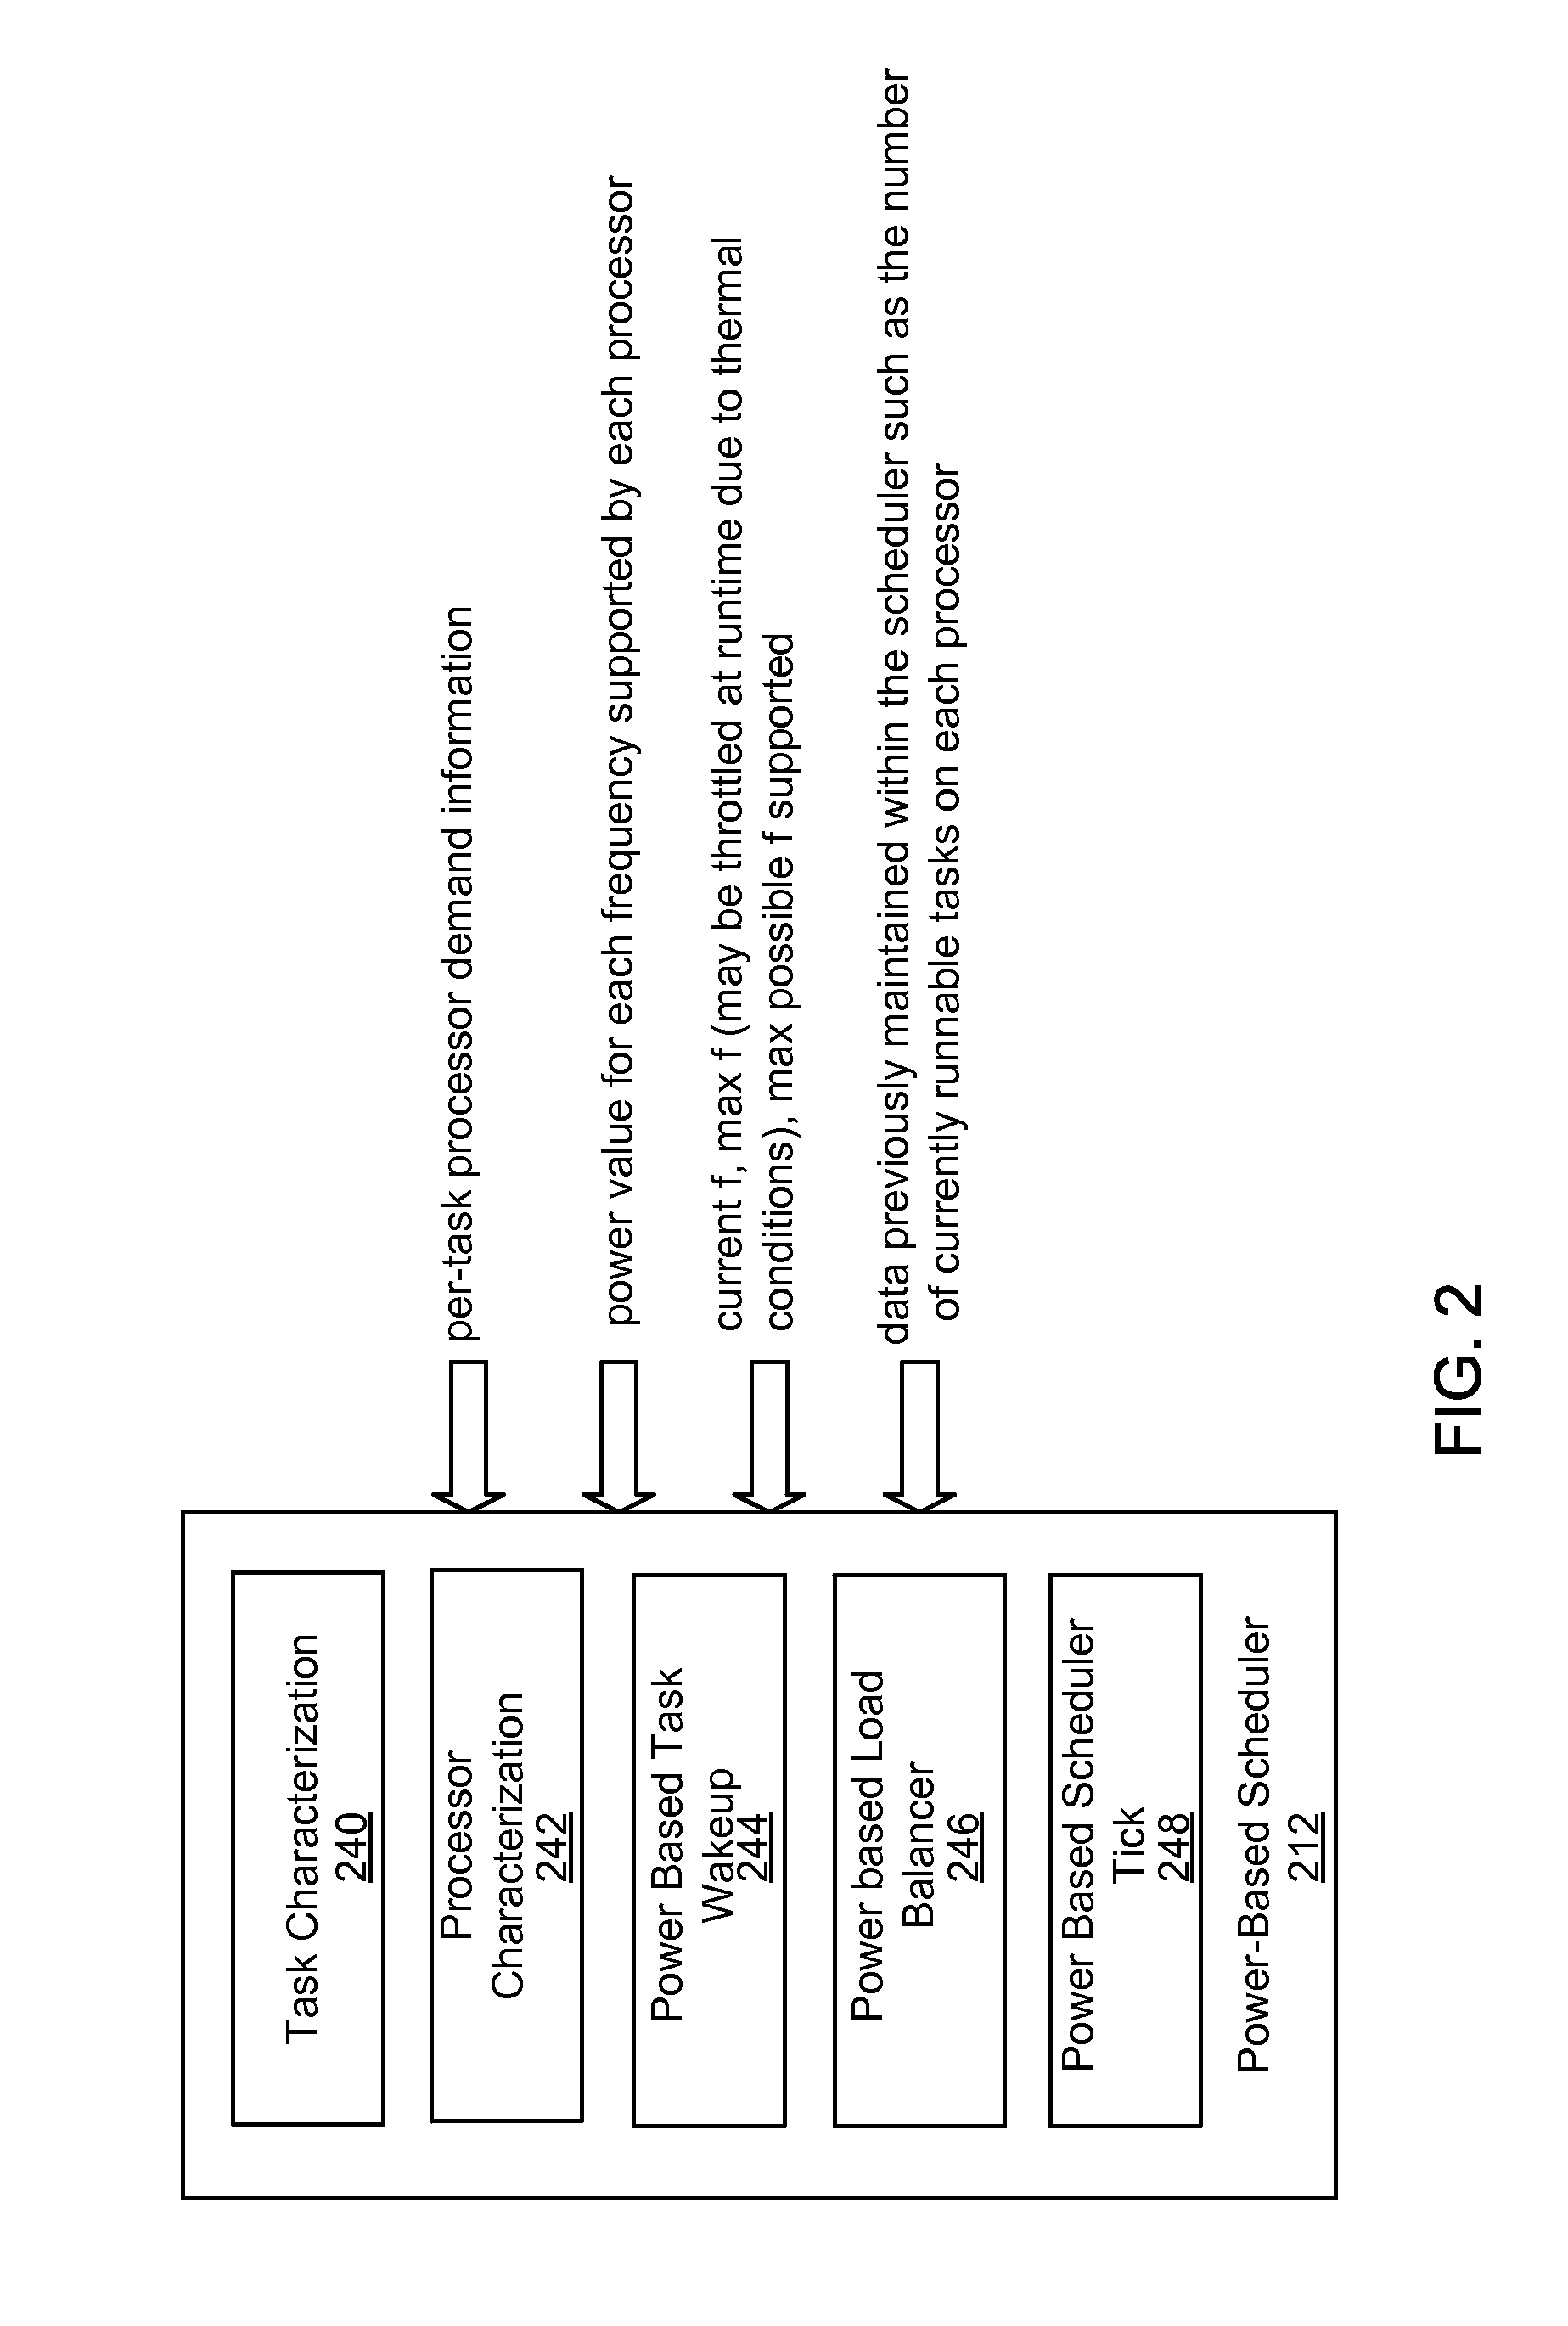 Power aware task scheduling on multi-processor systems